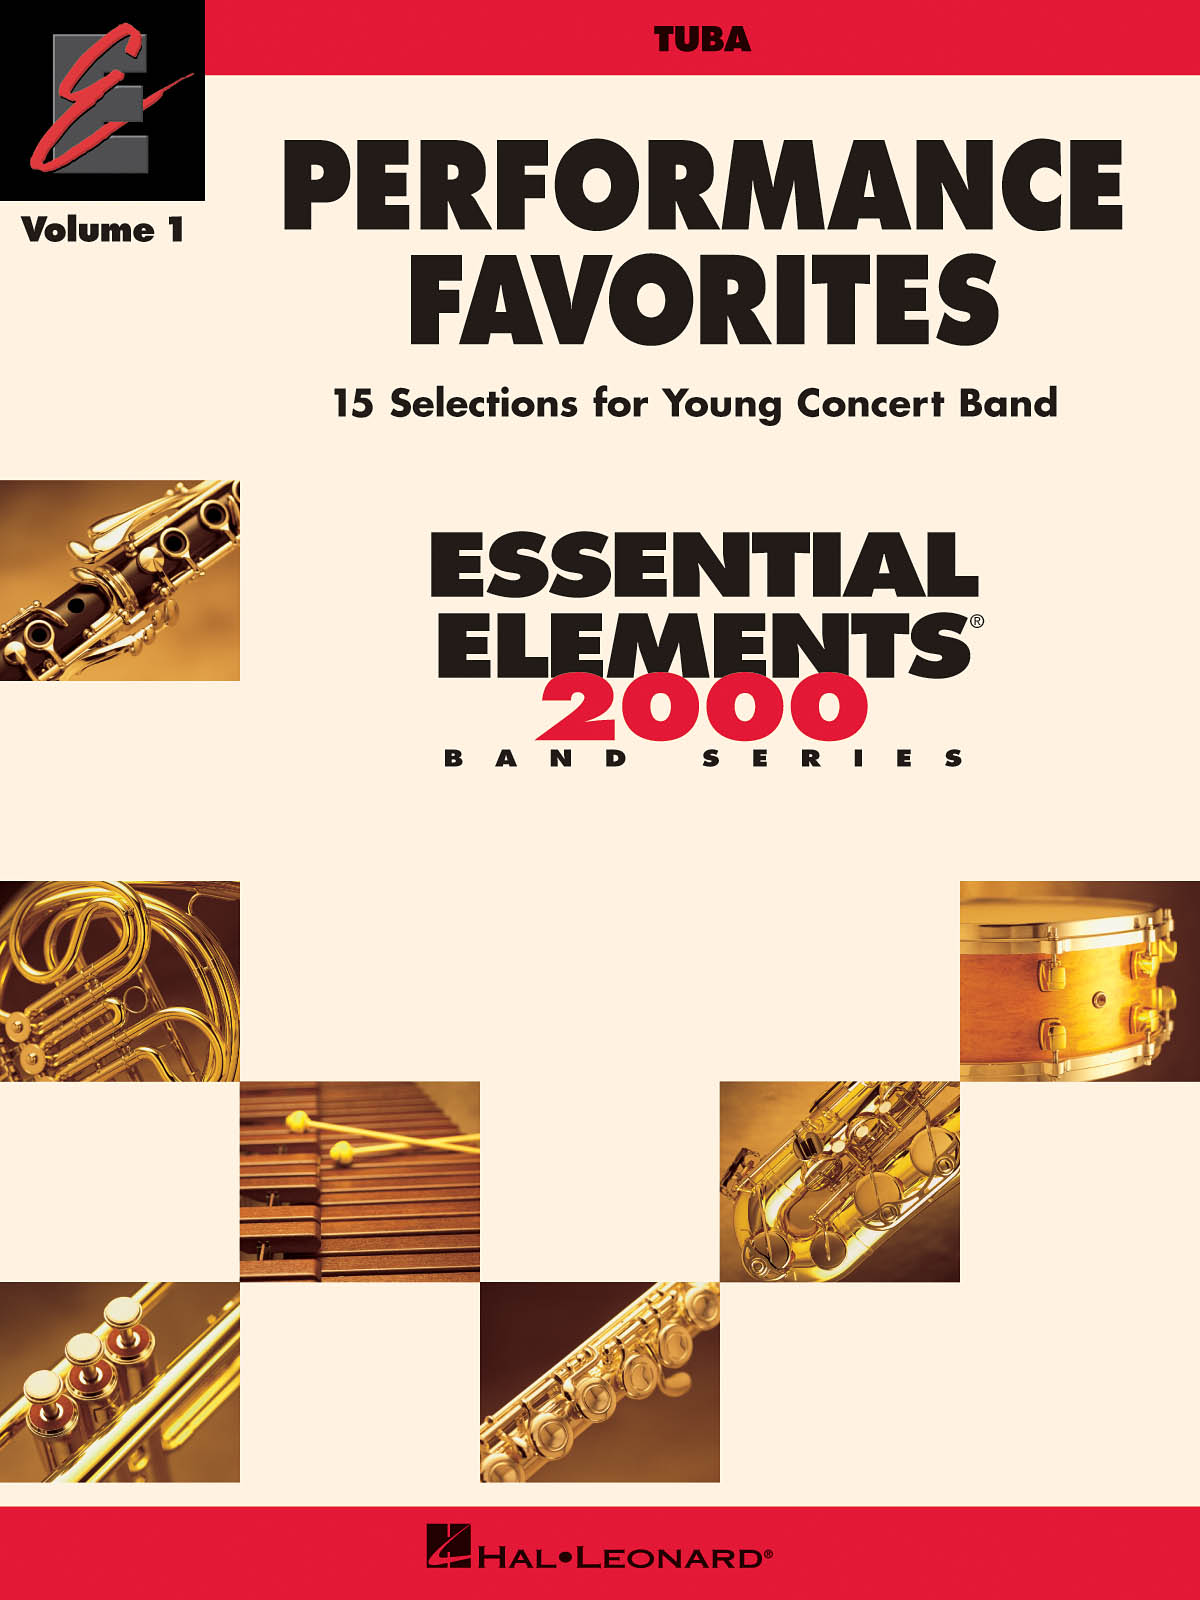 Performance Favorites Vol. 1 - Tuba - 15 Selections for Young Concert Band - noty pro tubu